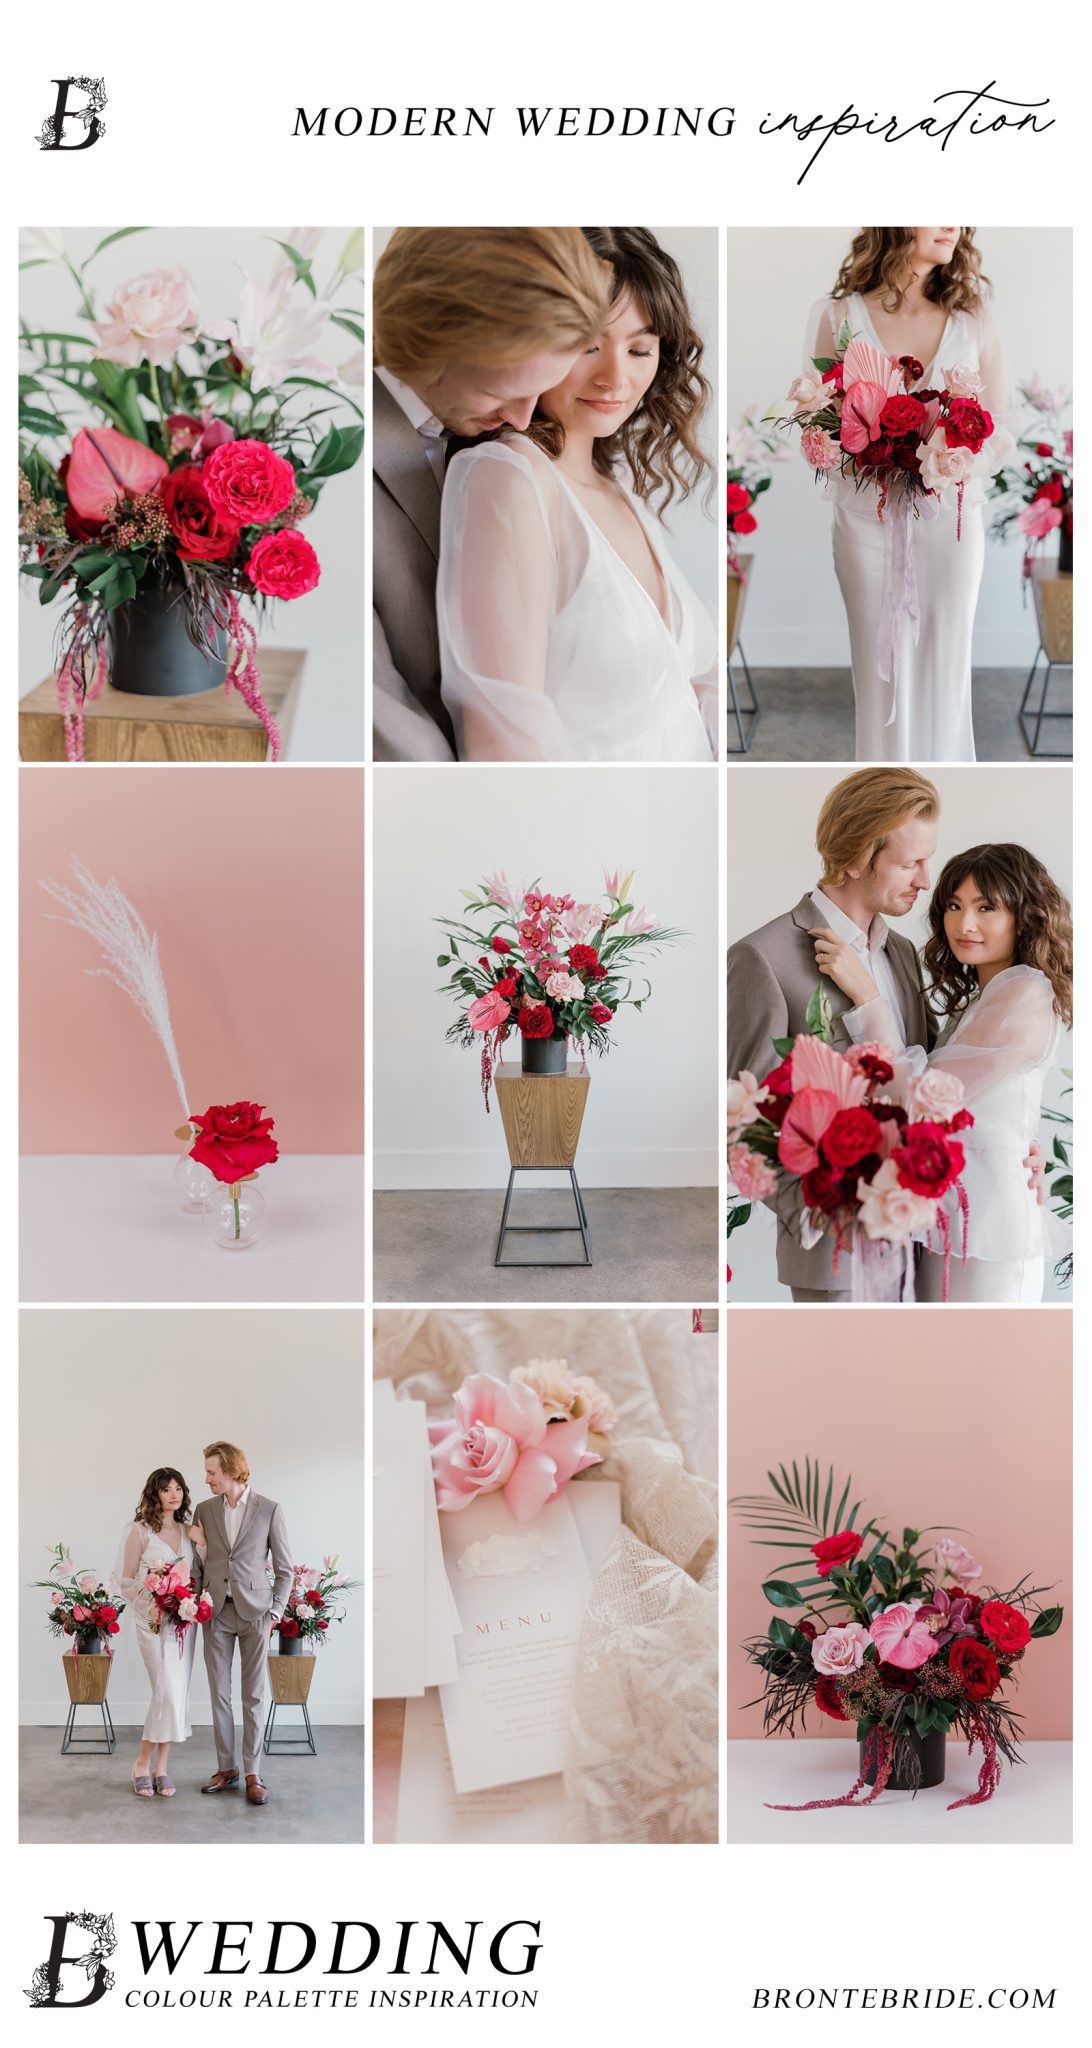 Modern Colour Palette Inspiration - Berry and Pink Wedding Colour Scheme on Bronte Bride 